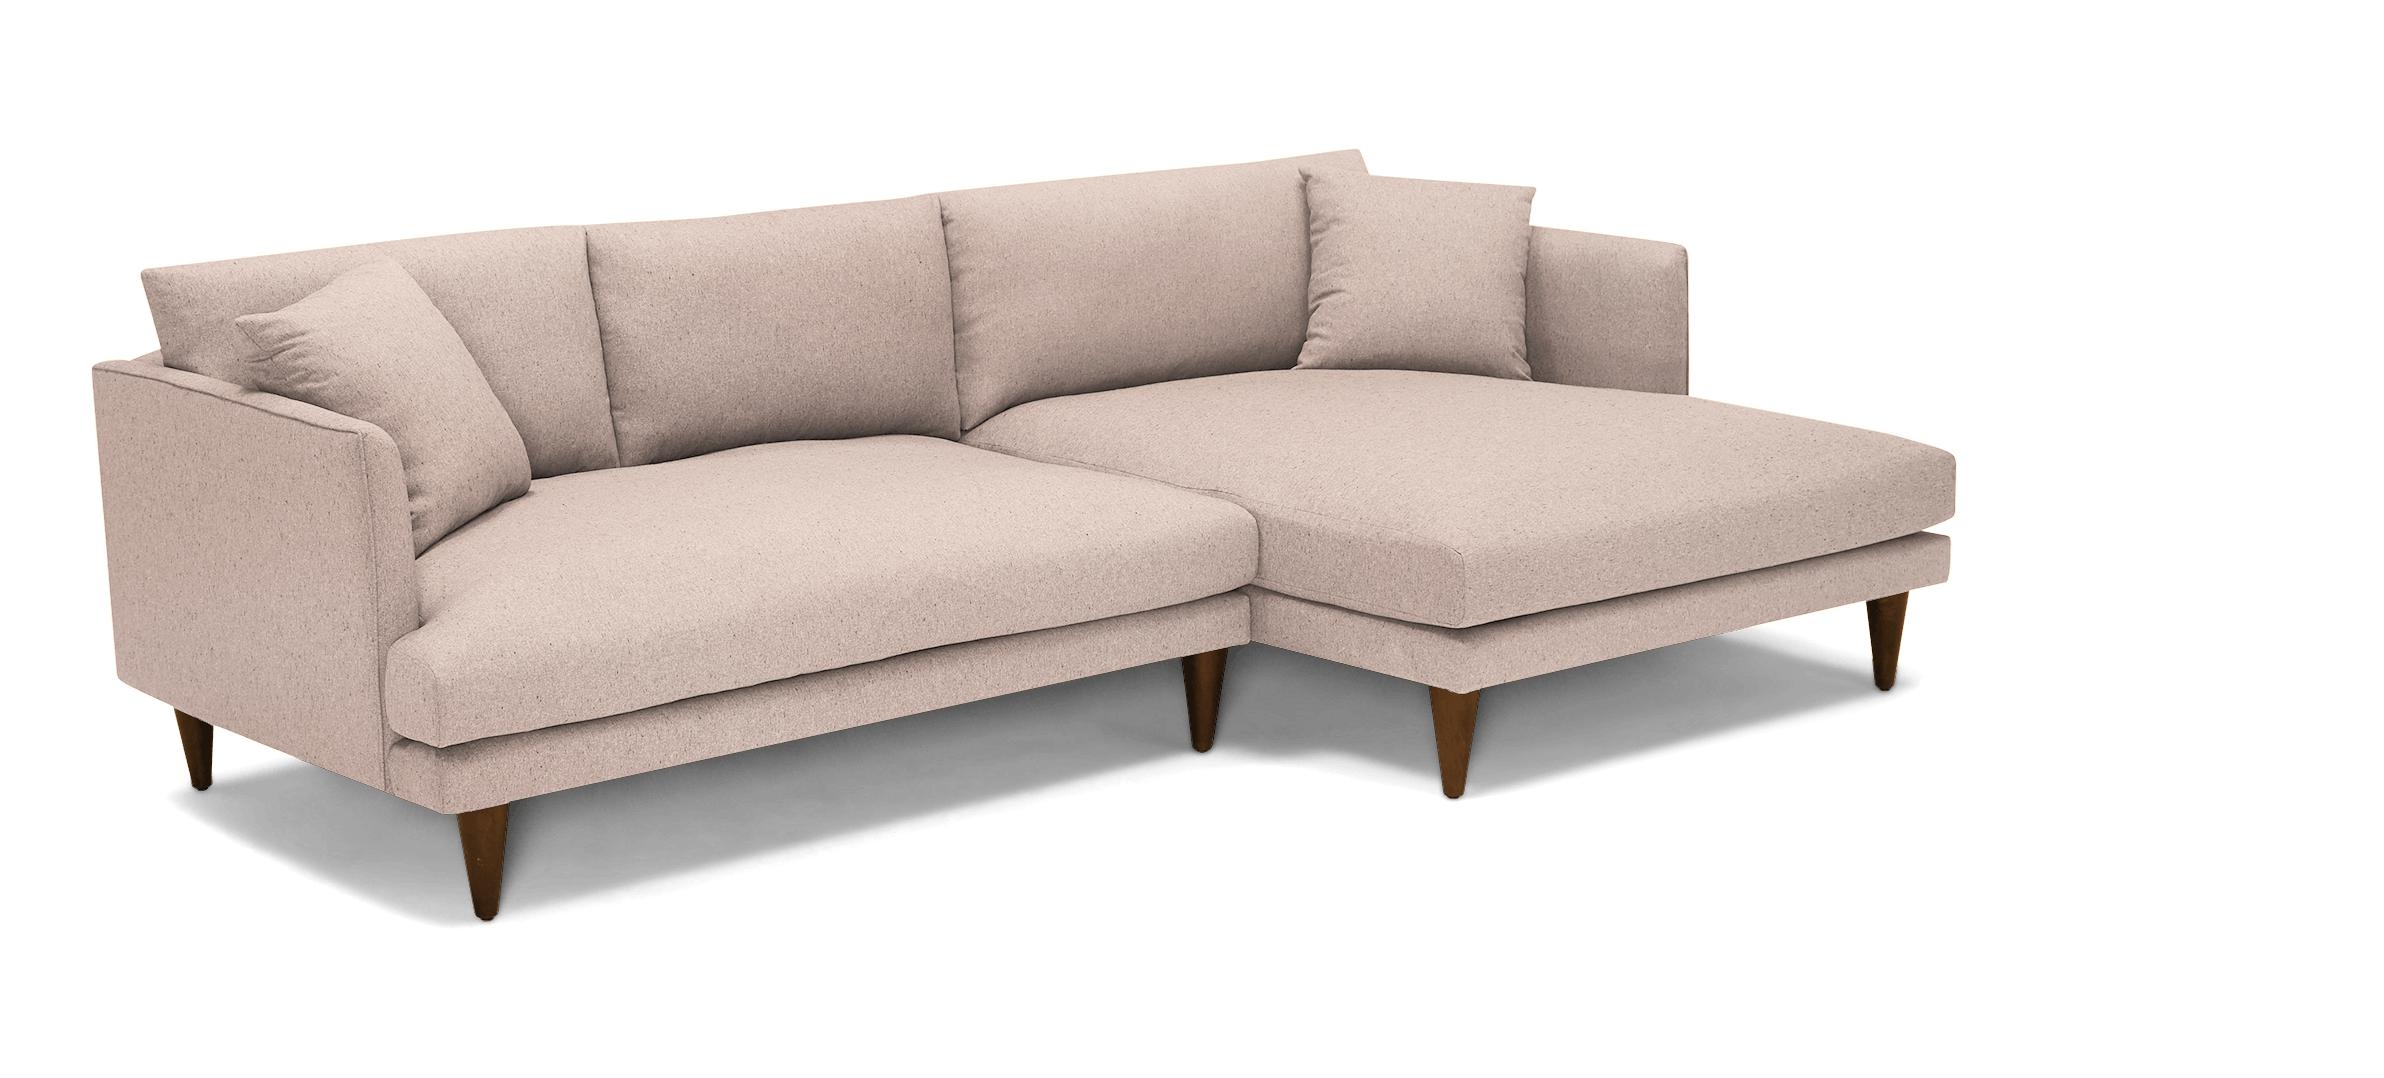 Pink Lewis Mid Century Modern Sectional - Prime Blush - Mocha - Right - Cone - Image 1